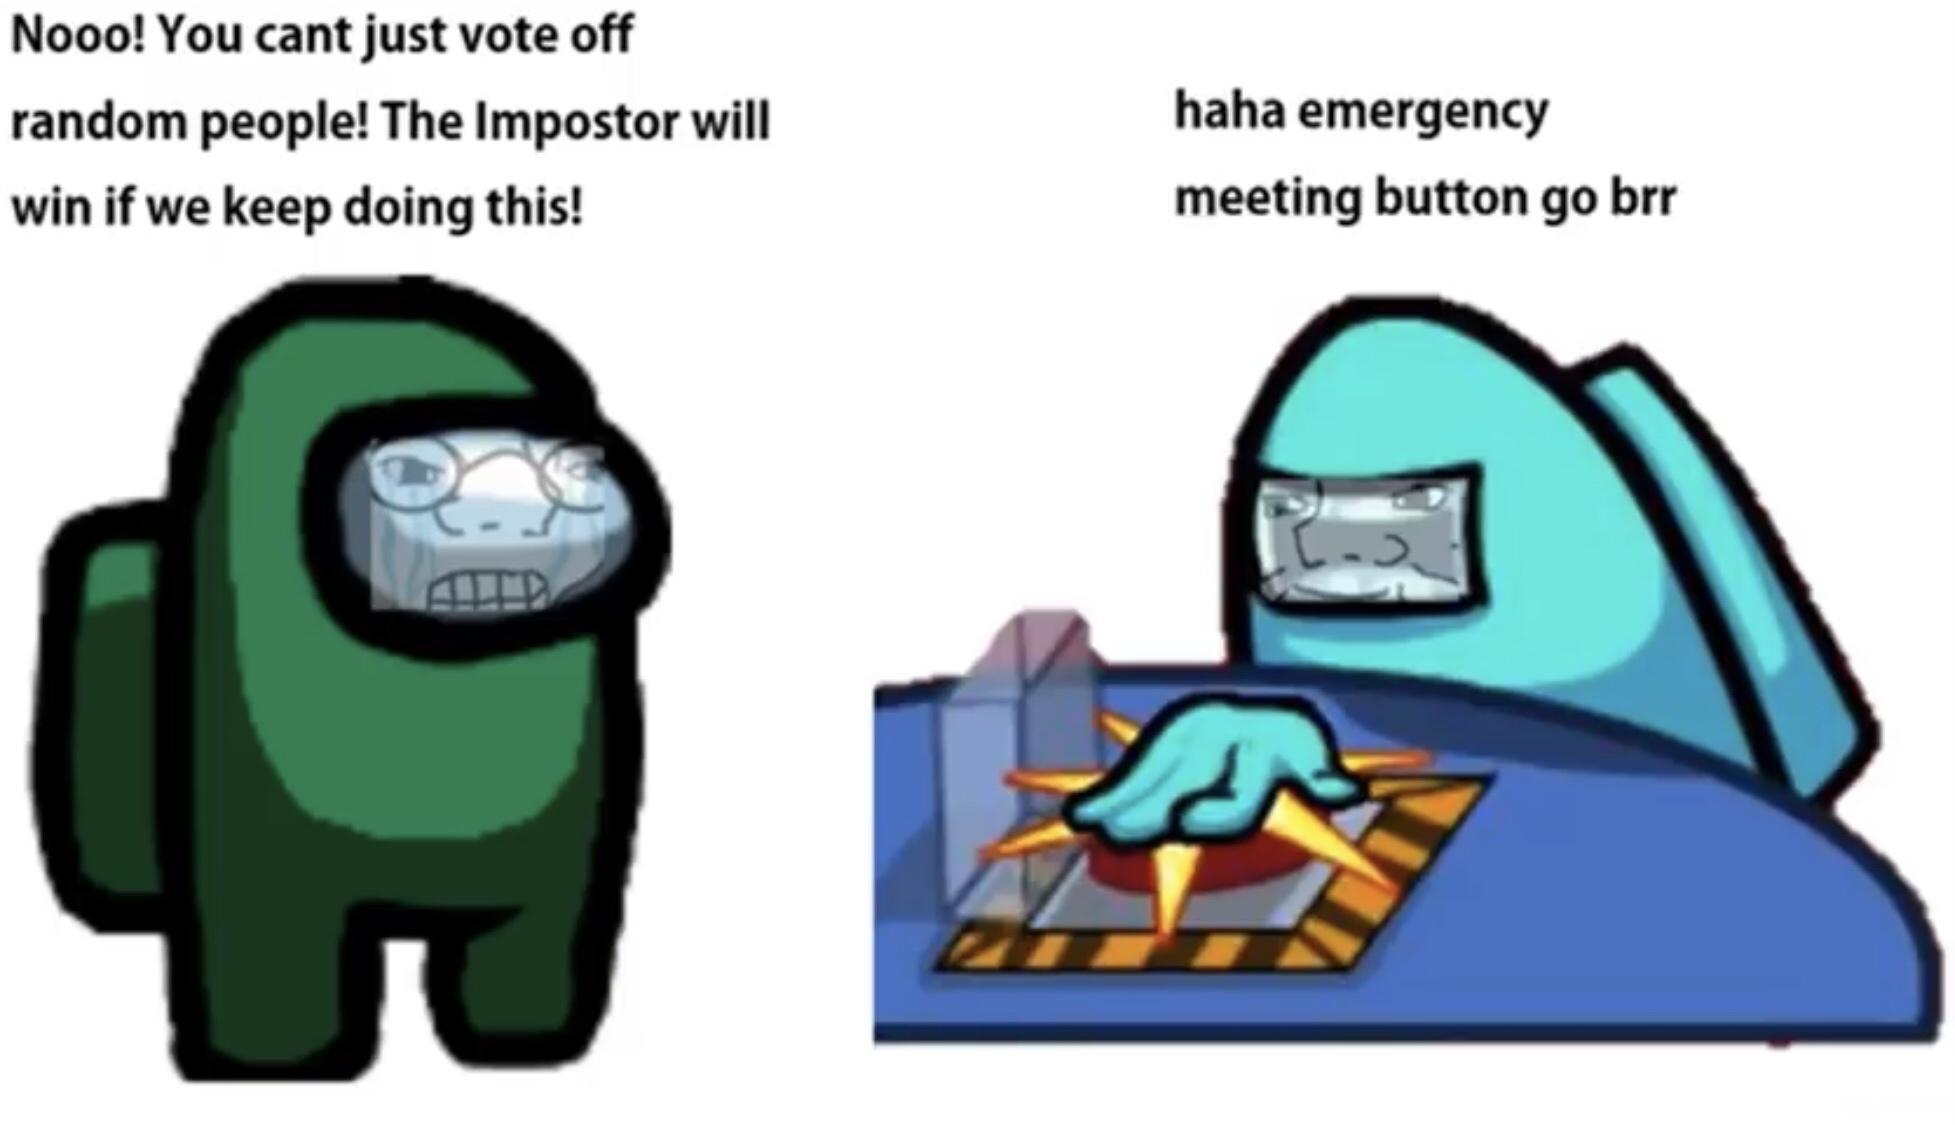 cartoon - Nooo! You cant just vote off random people! The Impostor will win if we keep doing this! haha emergency meeting button go brr